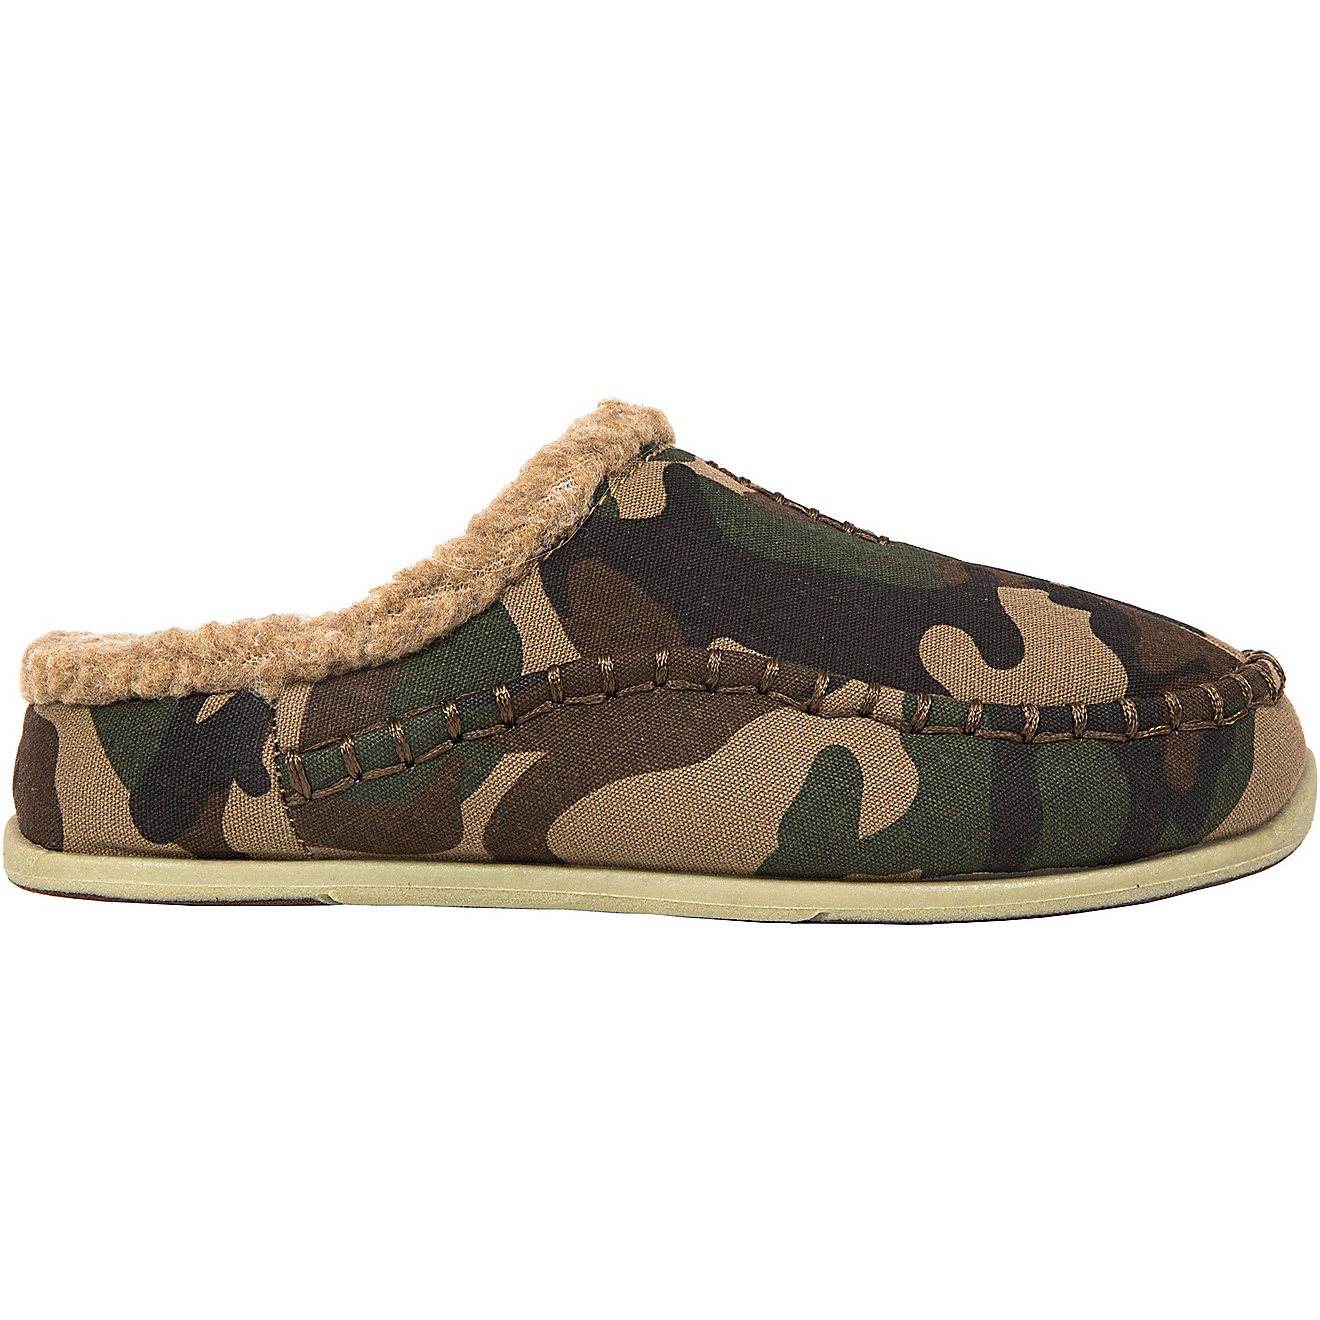 Deer Stags Kids' Slipperooz Lil Nordic Camo Slippers | Academy